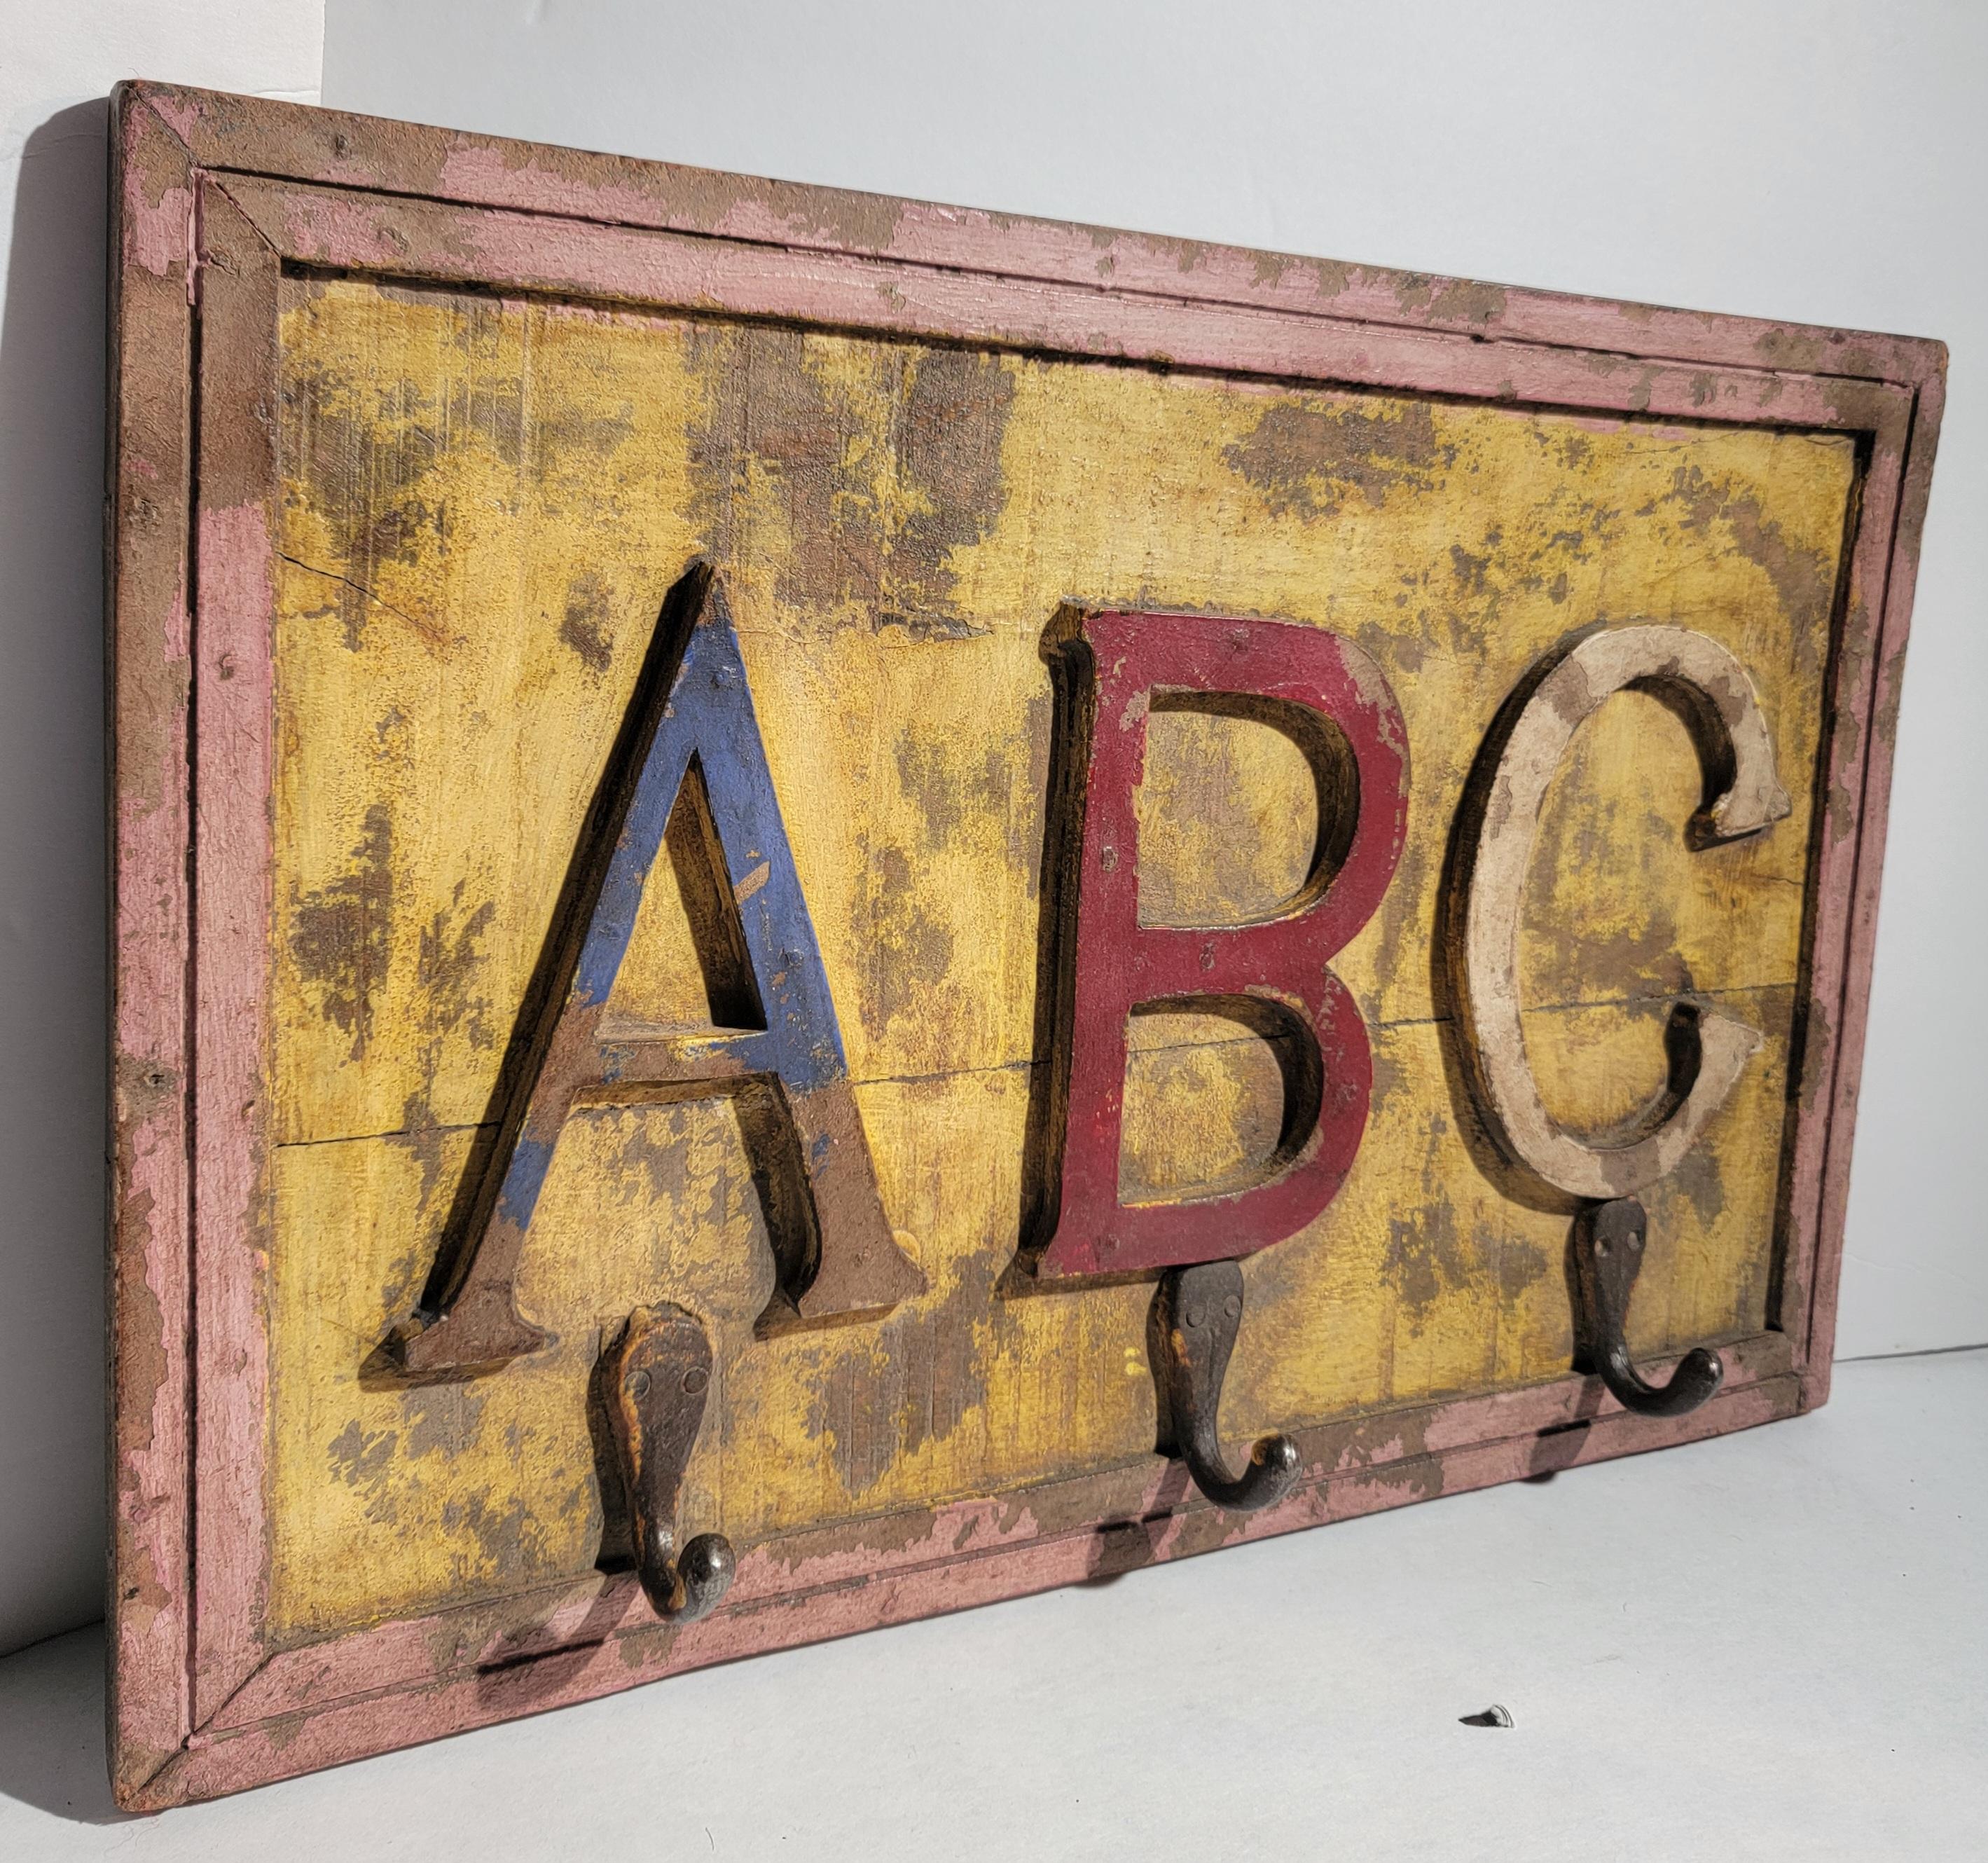 Fun and colorful wooded 40s ABC hat and coat rack. this colorful hat or coat rack has a fun childish feel that shouts wonder and imagination. Such a fun and subtle way to present the childish nature in an antique. The back of this board has 2